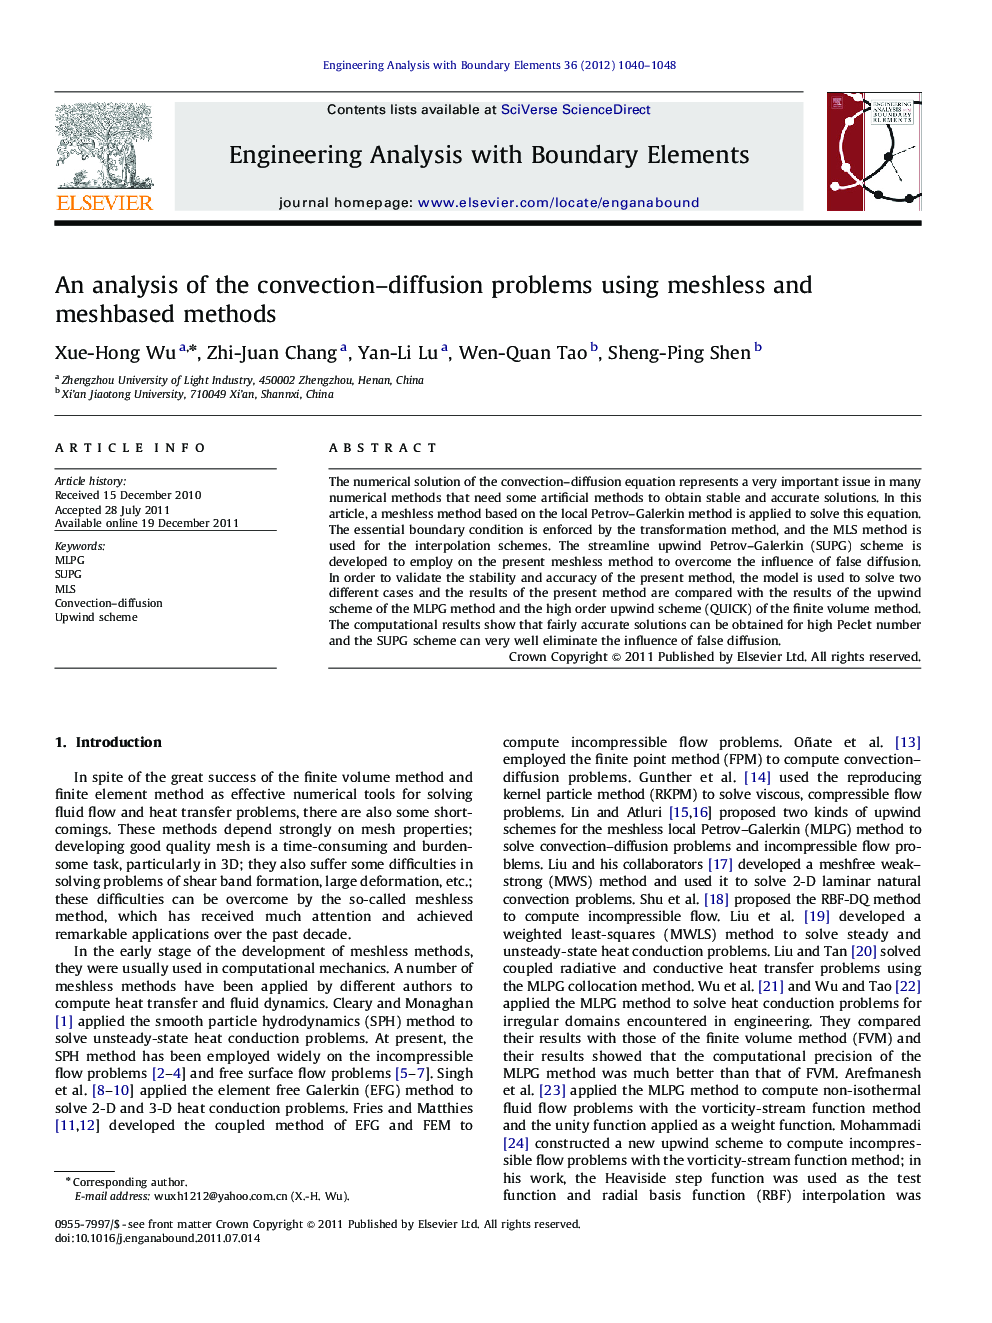 An analysis of the convection–diffusion problems using meshless and meshbased methods